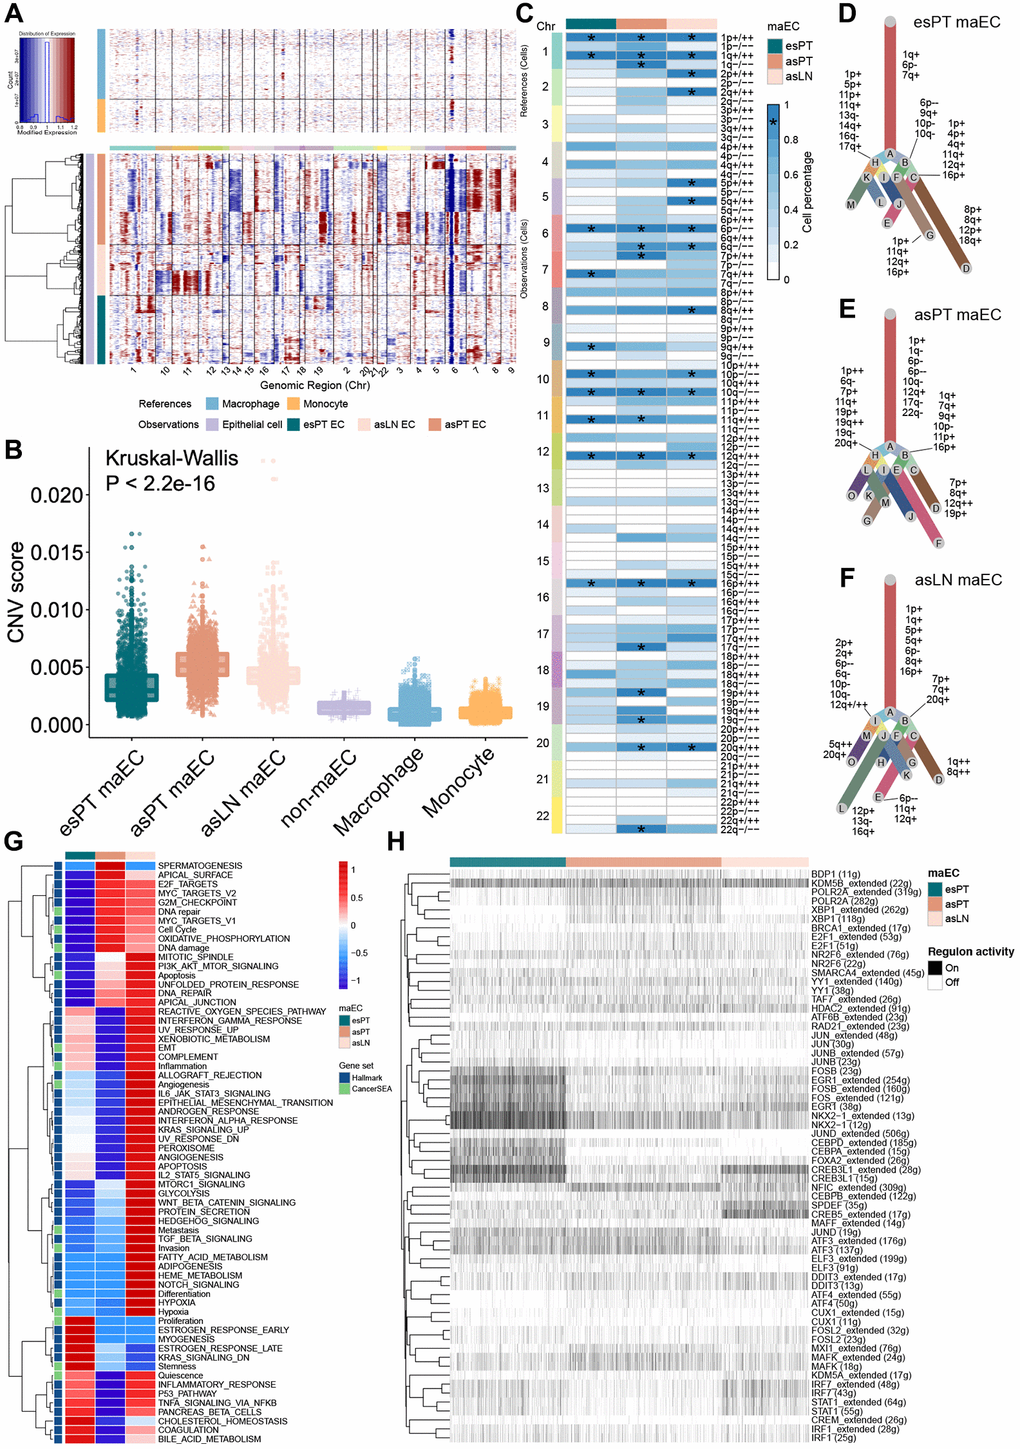 Copy number variation analysis of epithelial cells from primary tumor and metastasis lymph node. (A) Representative hierarchical heatmap showing large-scale CNVs in maECs from various samples. Gains (red) or losses (blue) were inferred by averaging the expression over 100 gene stretches on the respective chromosomes. (B) The CNV score facilitated quantitatively determining malignant cells. (C) The summary plot of the CNV profile of malignant ECs from esPT, asPT and asLN. CNVs were converted to the chromosome arm level change and simplified as gain or loss. (D–F) The clonal evolutionary trees of maECs from esPT, asPT and asLN, respectively. The length of branch is determined by the percentage of cells containing the corresponding CNV in subclones. (G) The heatmap of GSVA demonstrated differences in enriched pathways among maECs from esPT, asPT and asLN. (H) The hierarchical clustering heatmap of enriched transcription regulon using SCENIC analysis. *, means presenting in >90% of tumor cells. Abbreviations: CNVs: copy number variations; maECs: malignant epithelial cells; esPT: primary tumor in early stage LUAD; esLN: lymph node in early stage LUAD; asPT: primary tumor in advanced stage LUAD; asLN: lymph node in advanced stage LUAD; GSVA: gene set variation analysis; SCEINC: single-cell regulatory network inference and clustering.